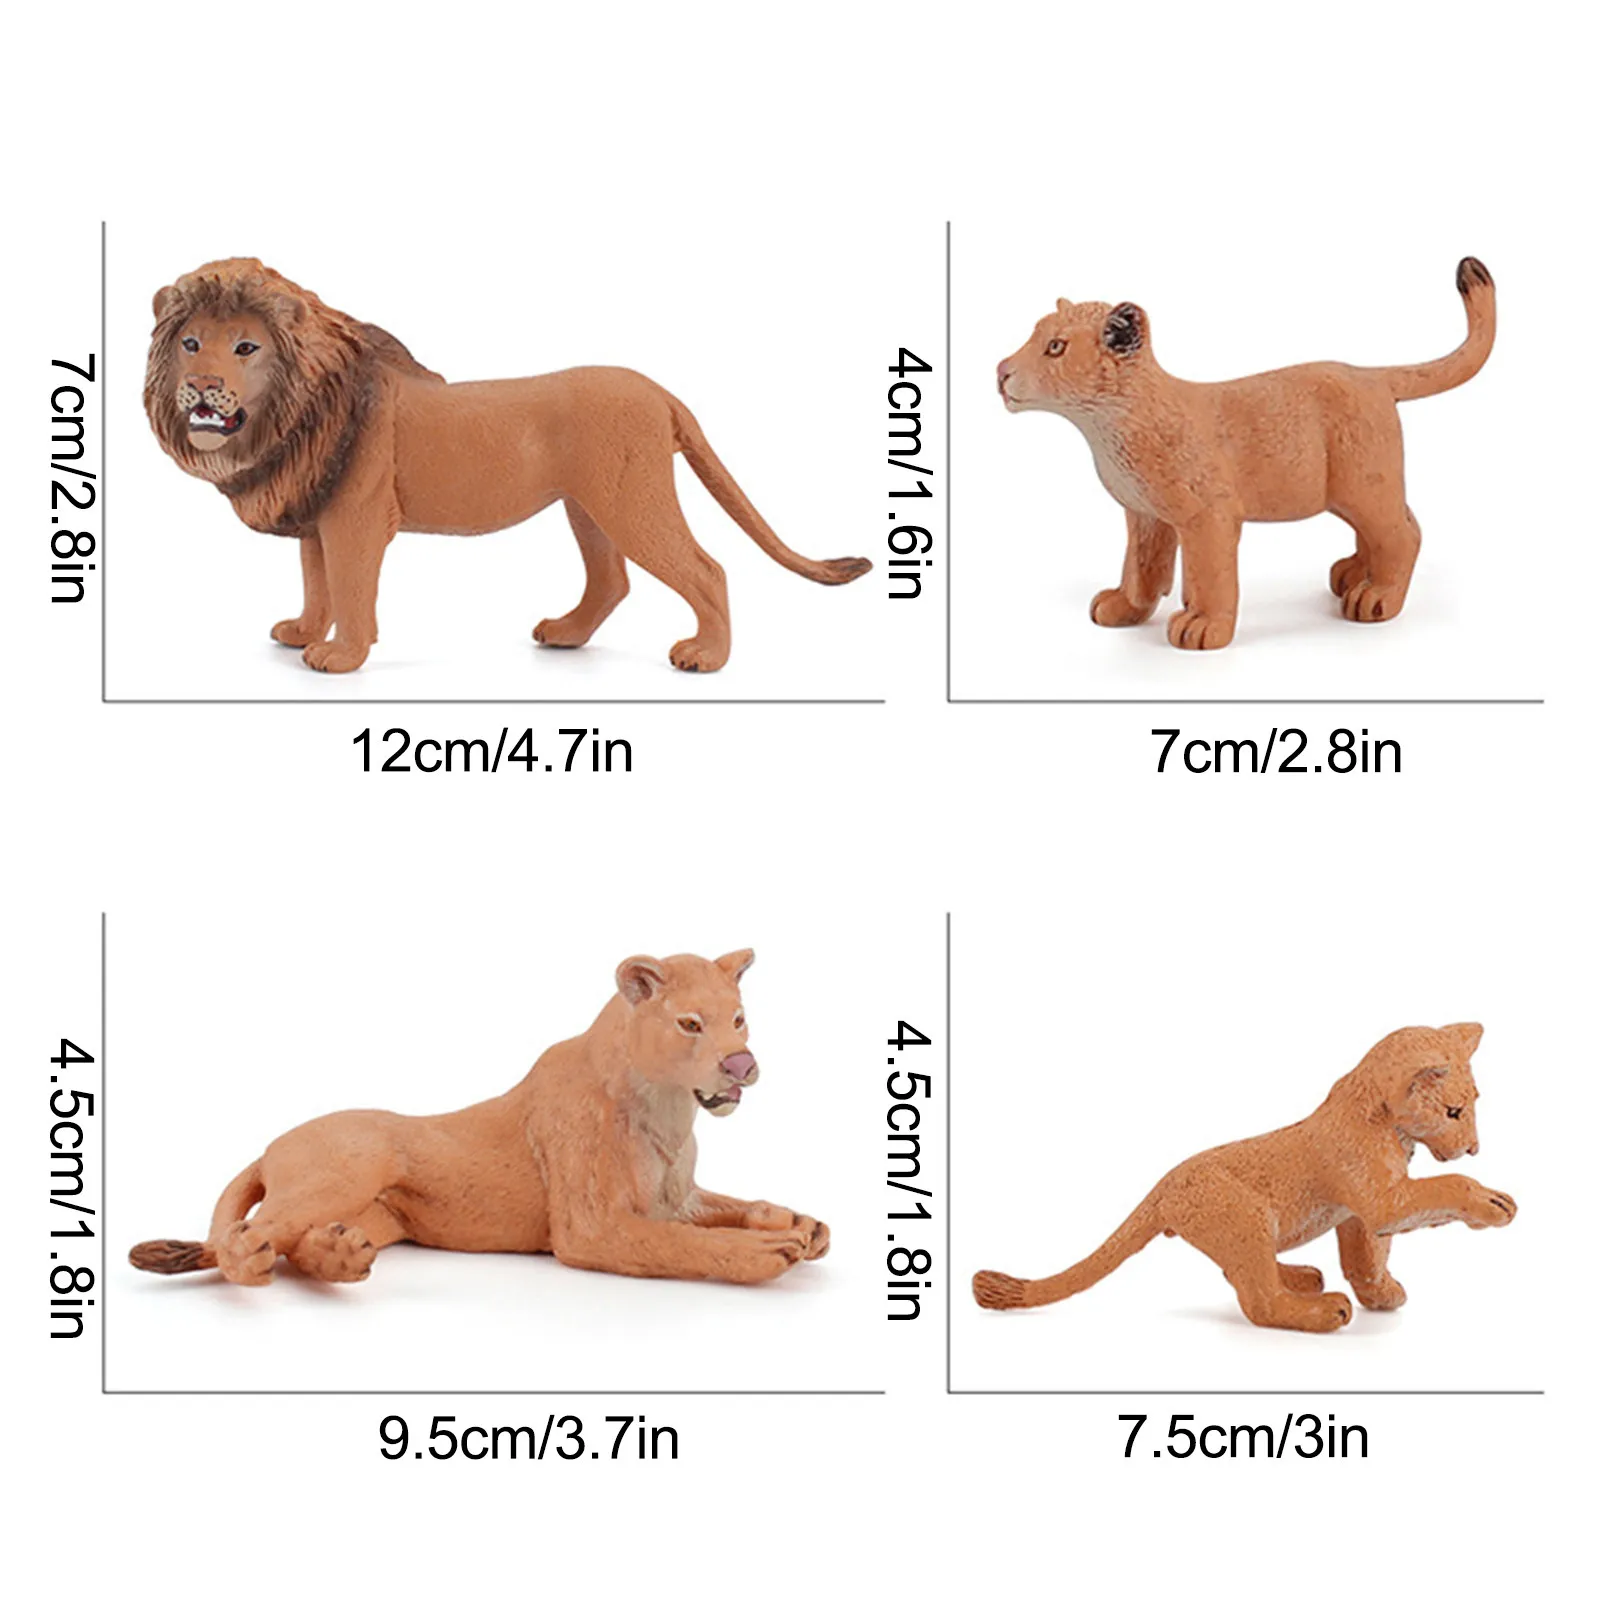 

Lion Animal Toy Figurines Fidget Toy Gift Educational Clear Outline Lifelike Home Accessories Model Kawaii Toys Crafts Kids